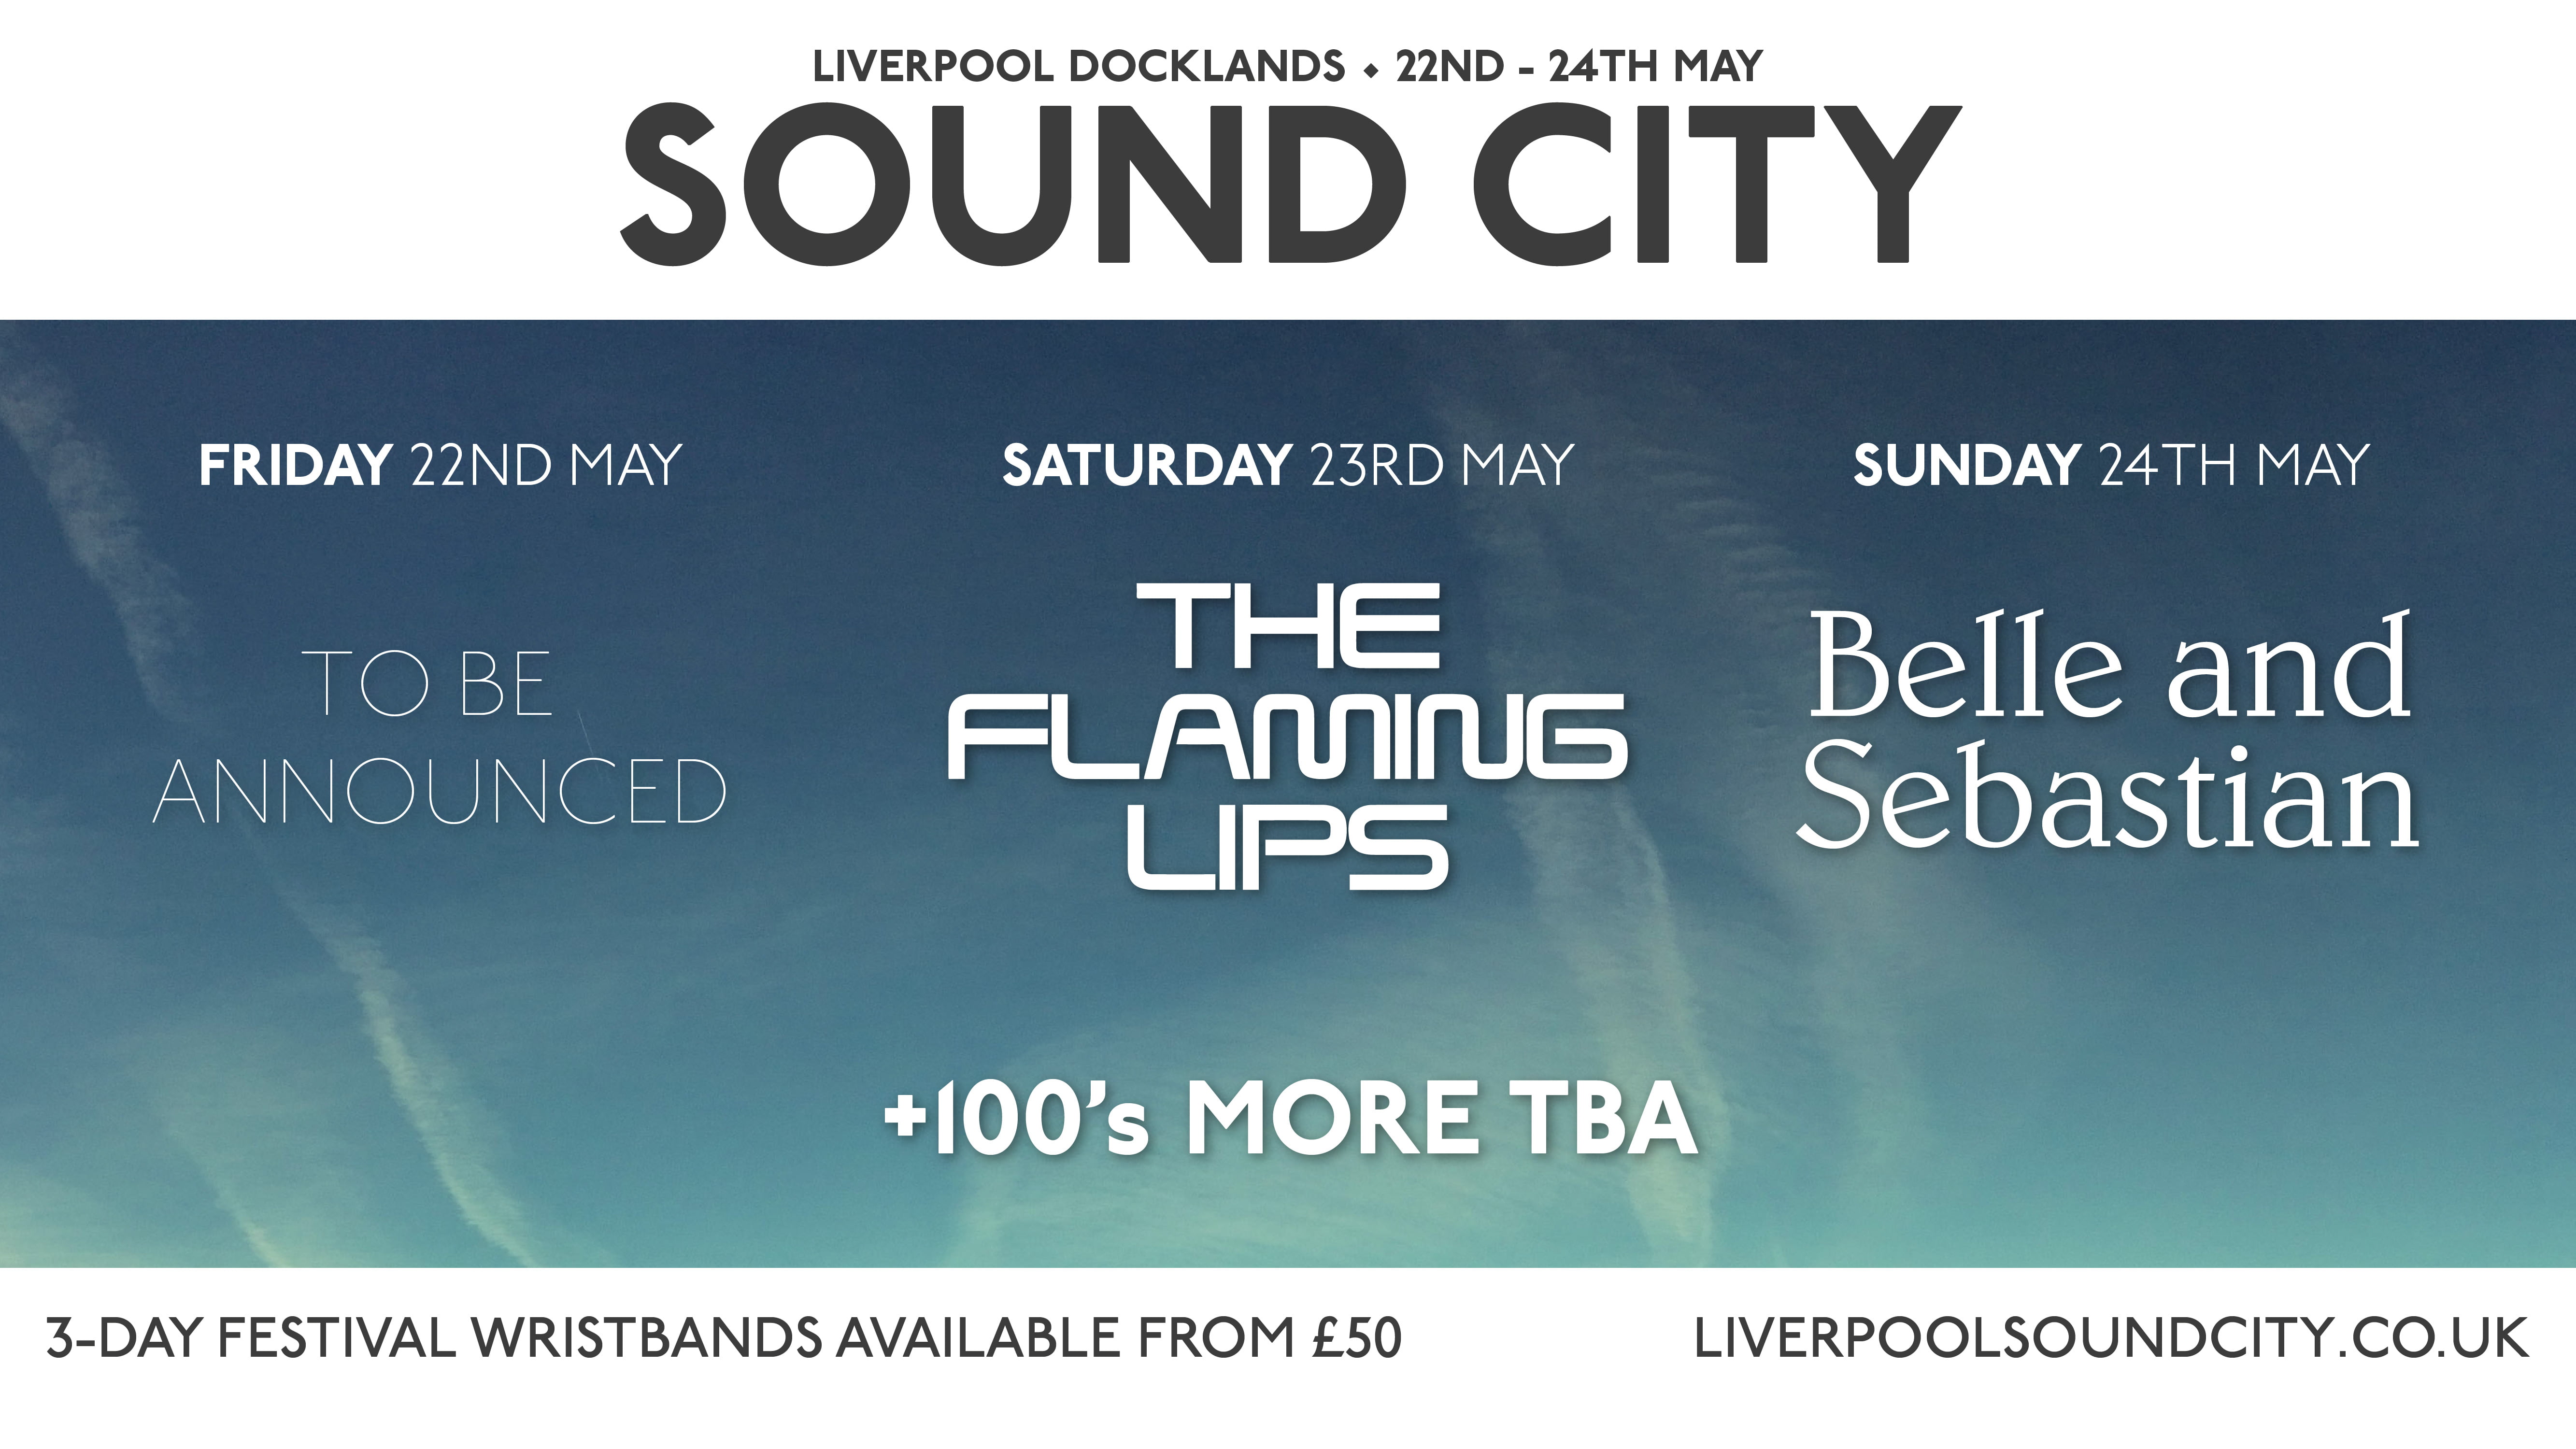 The VPME | Liverpool Sound City 2015 Announce Flaming Lips As Saturday Headliner 1